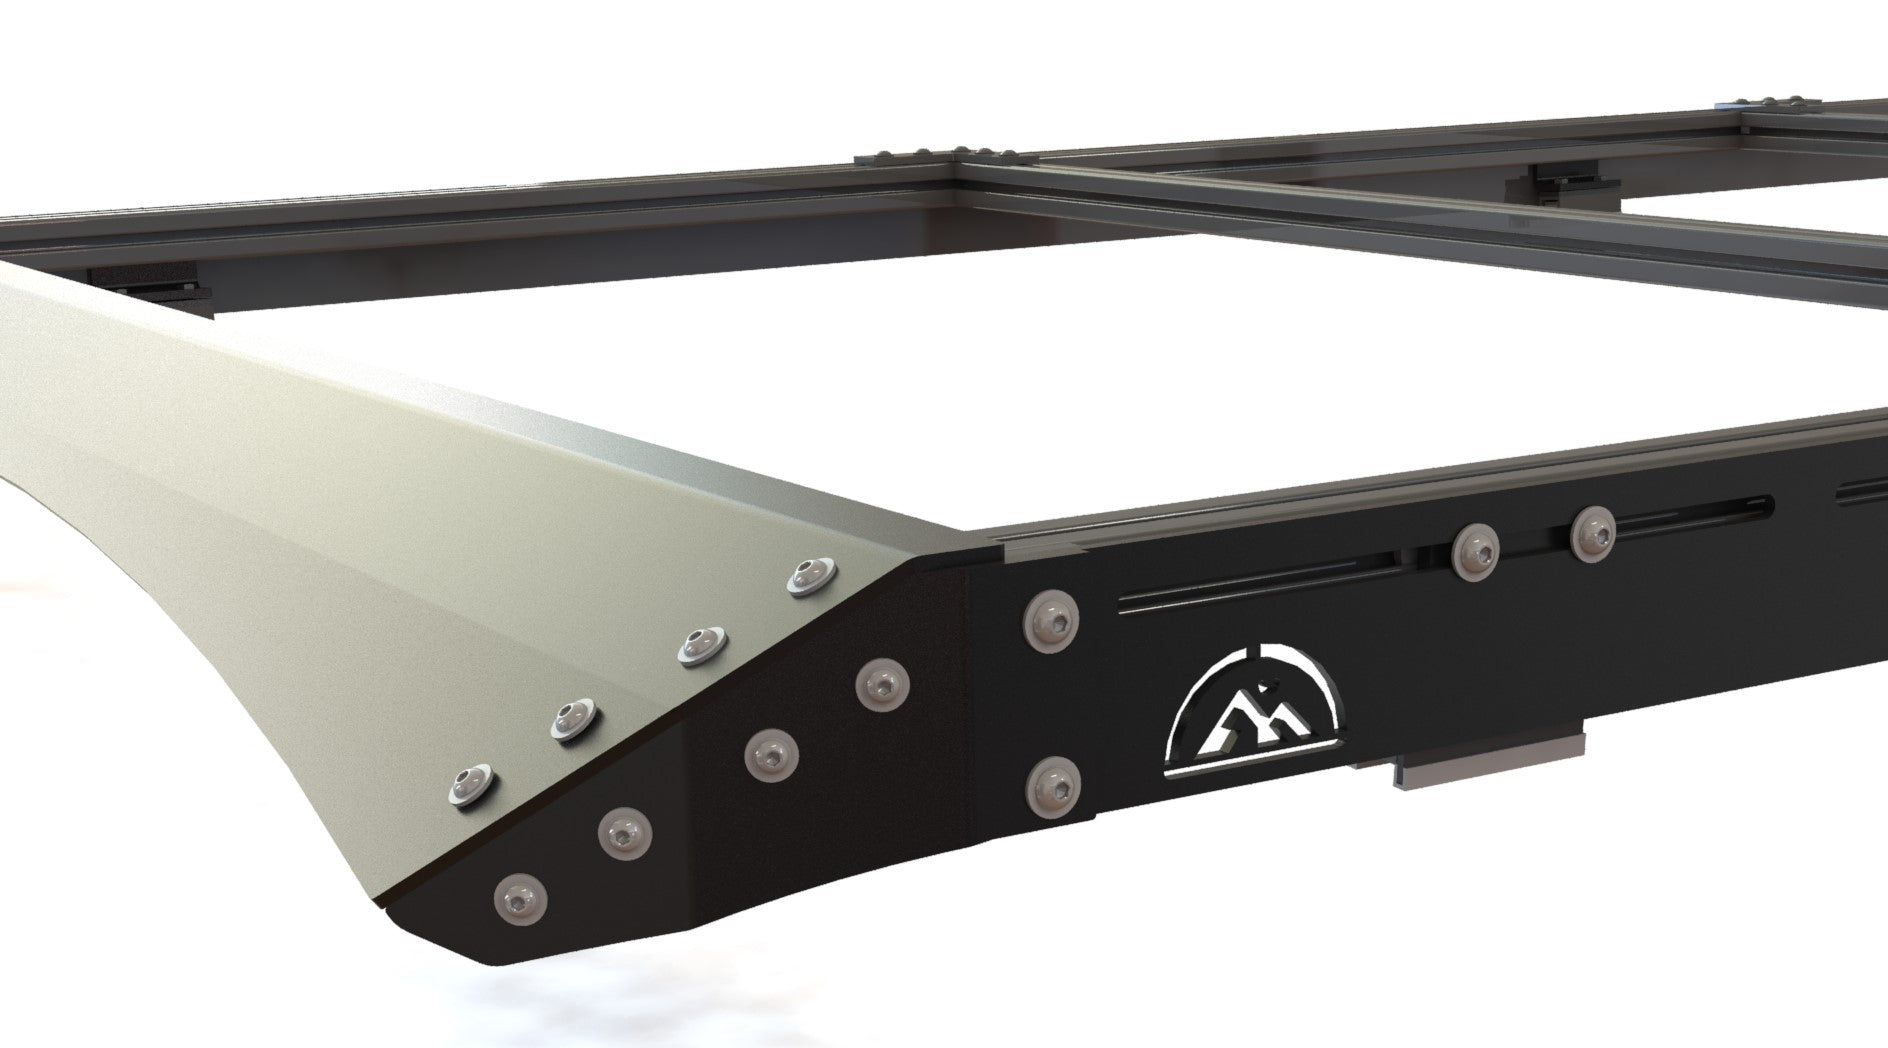 Ram Promaster Roof Rack - HSLD - 159 High Roof